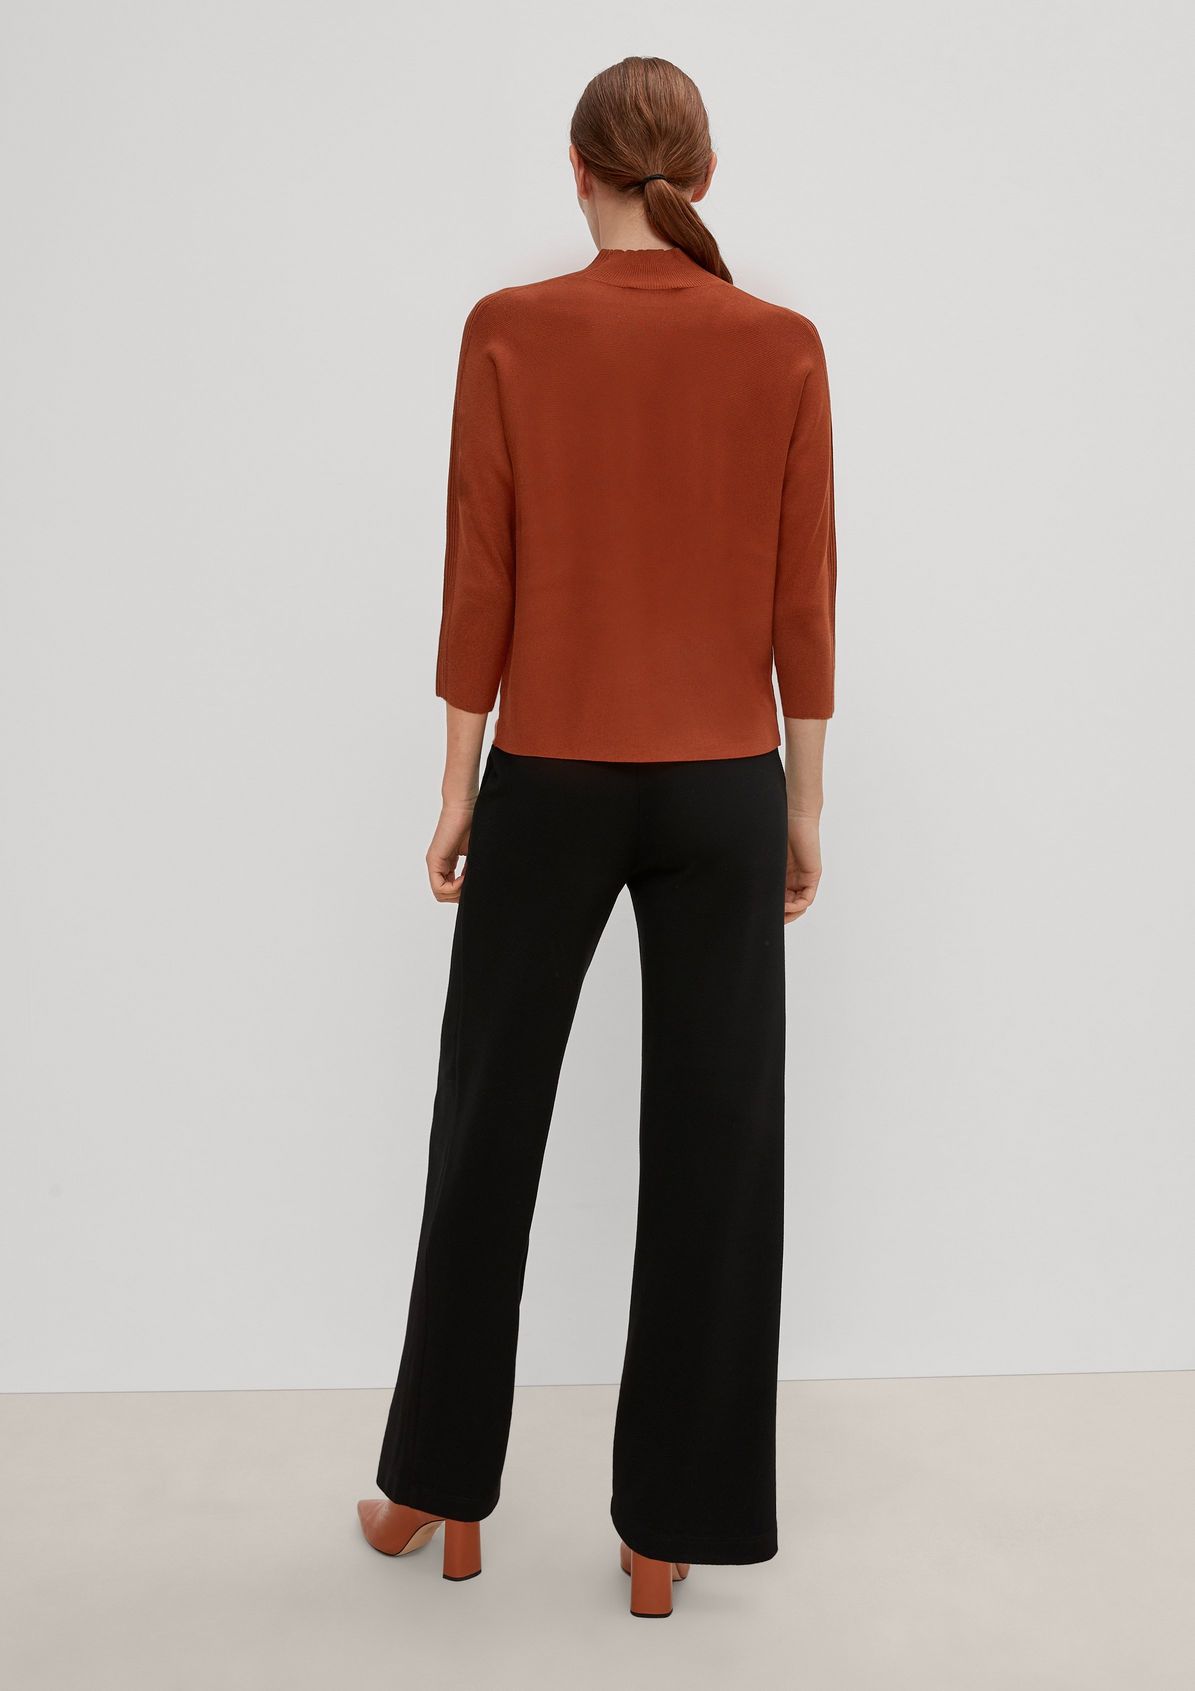 Fine knit jumper with 3/4-length sleeves from comma